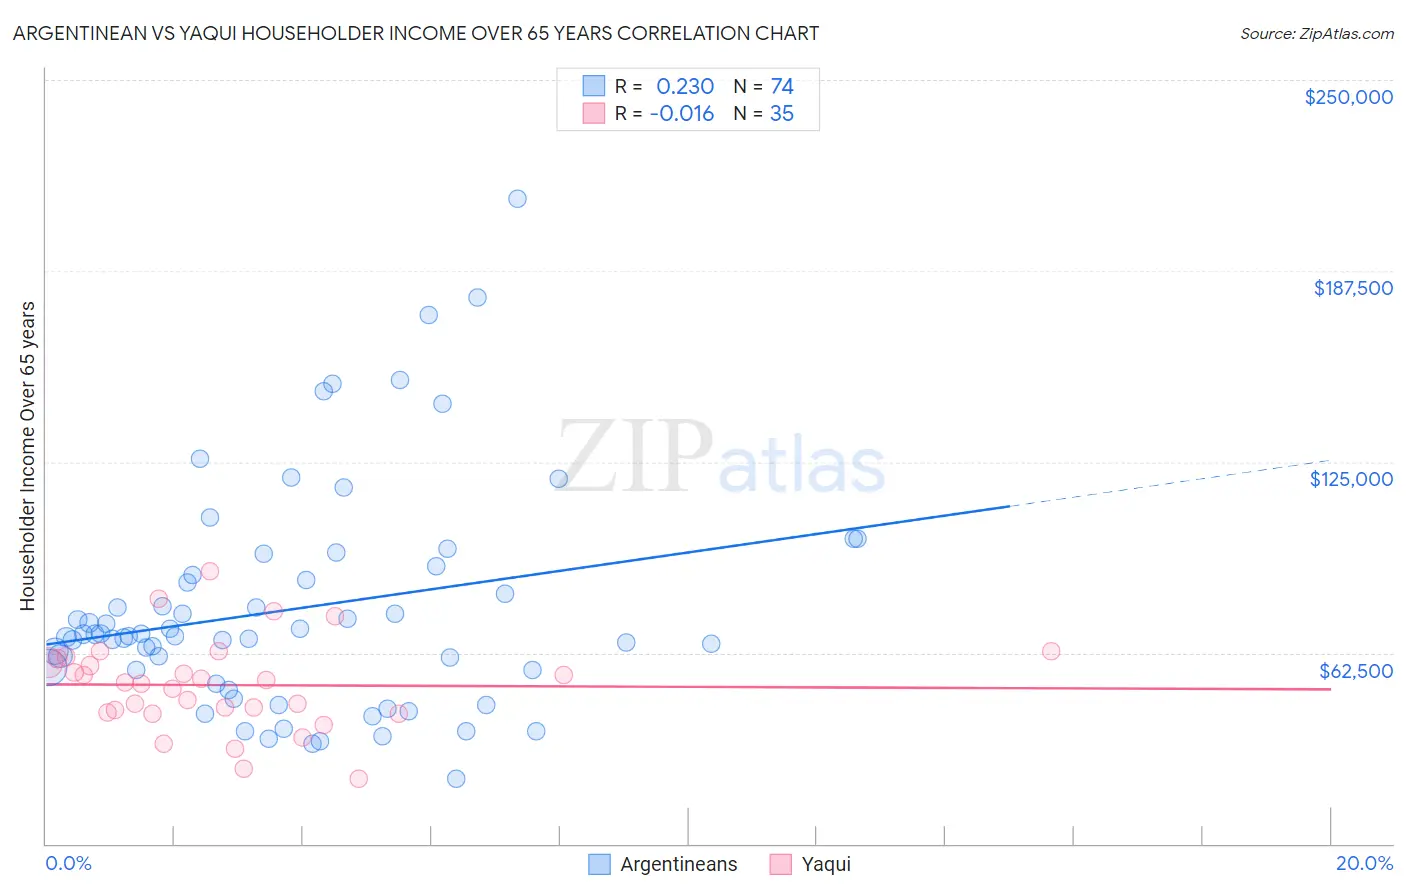 Argentinean vs Yaqui Householder Income Over 65 years